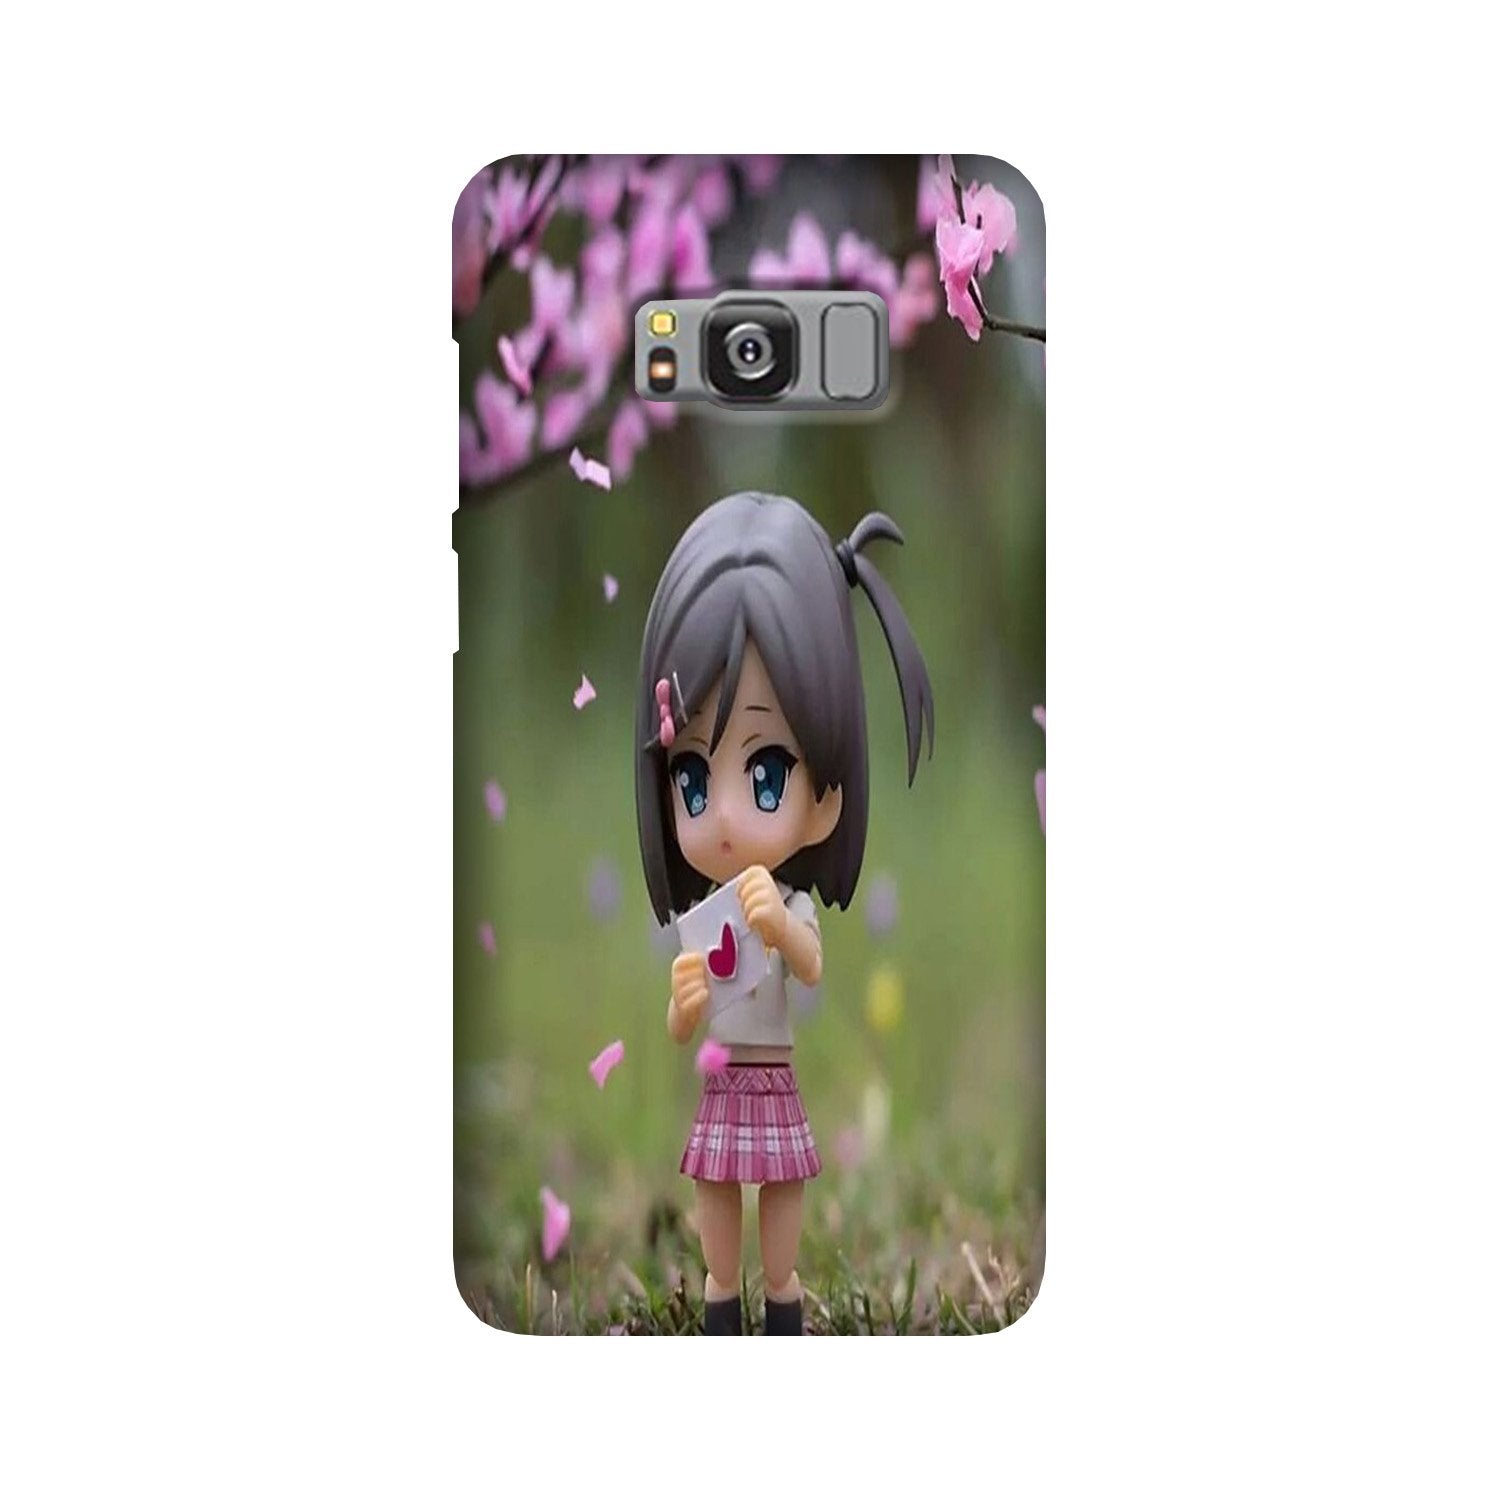 Cute Girl Case for Galaxy S8